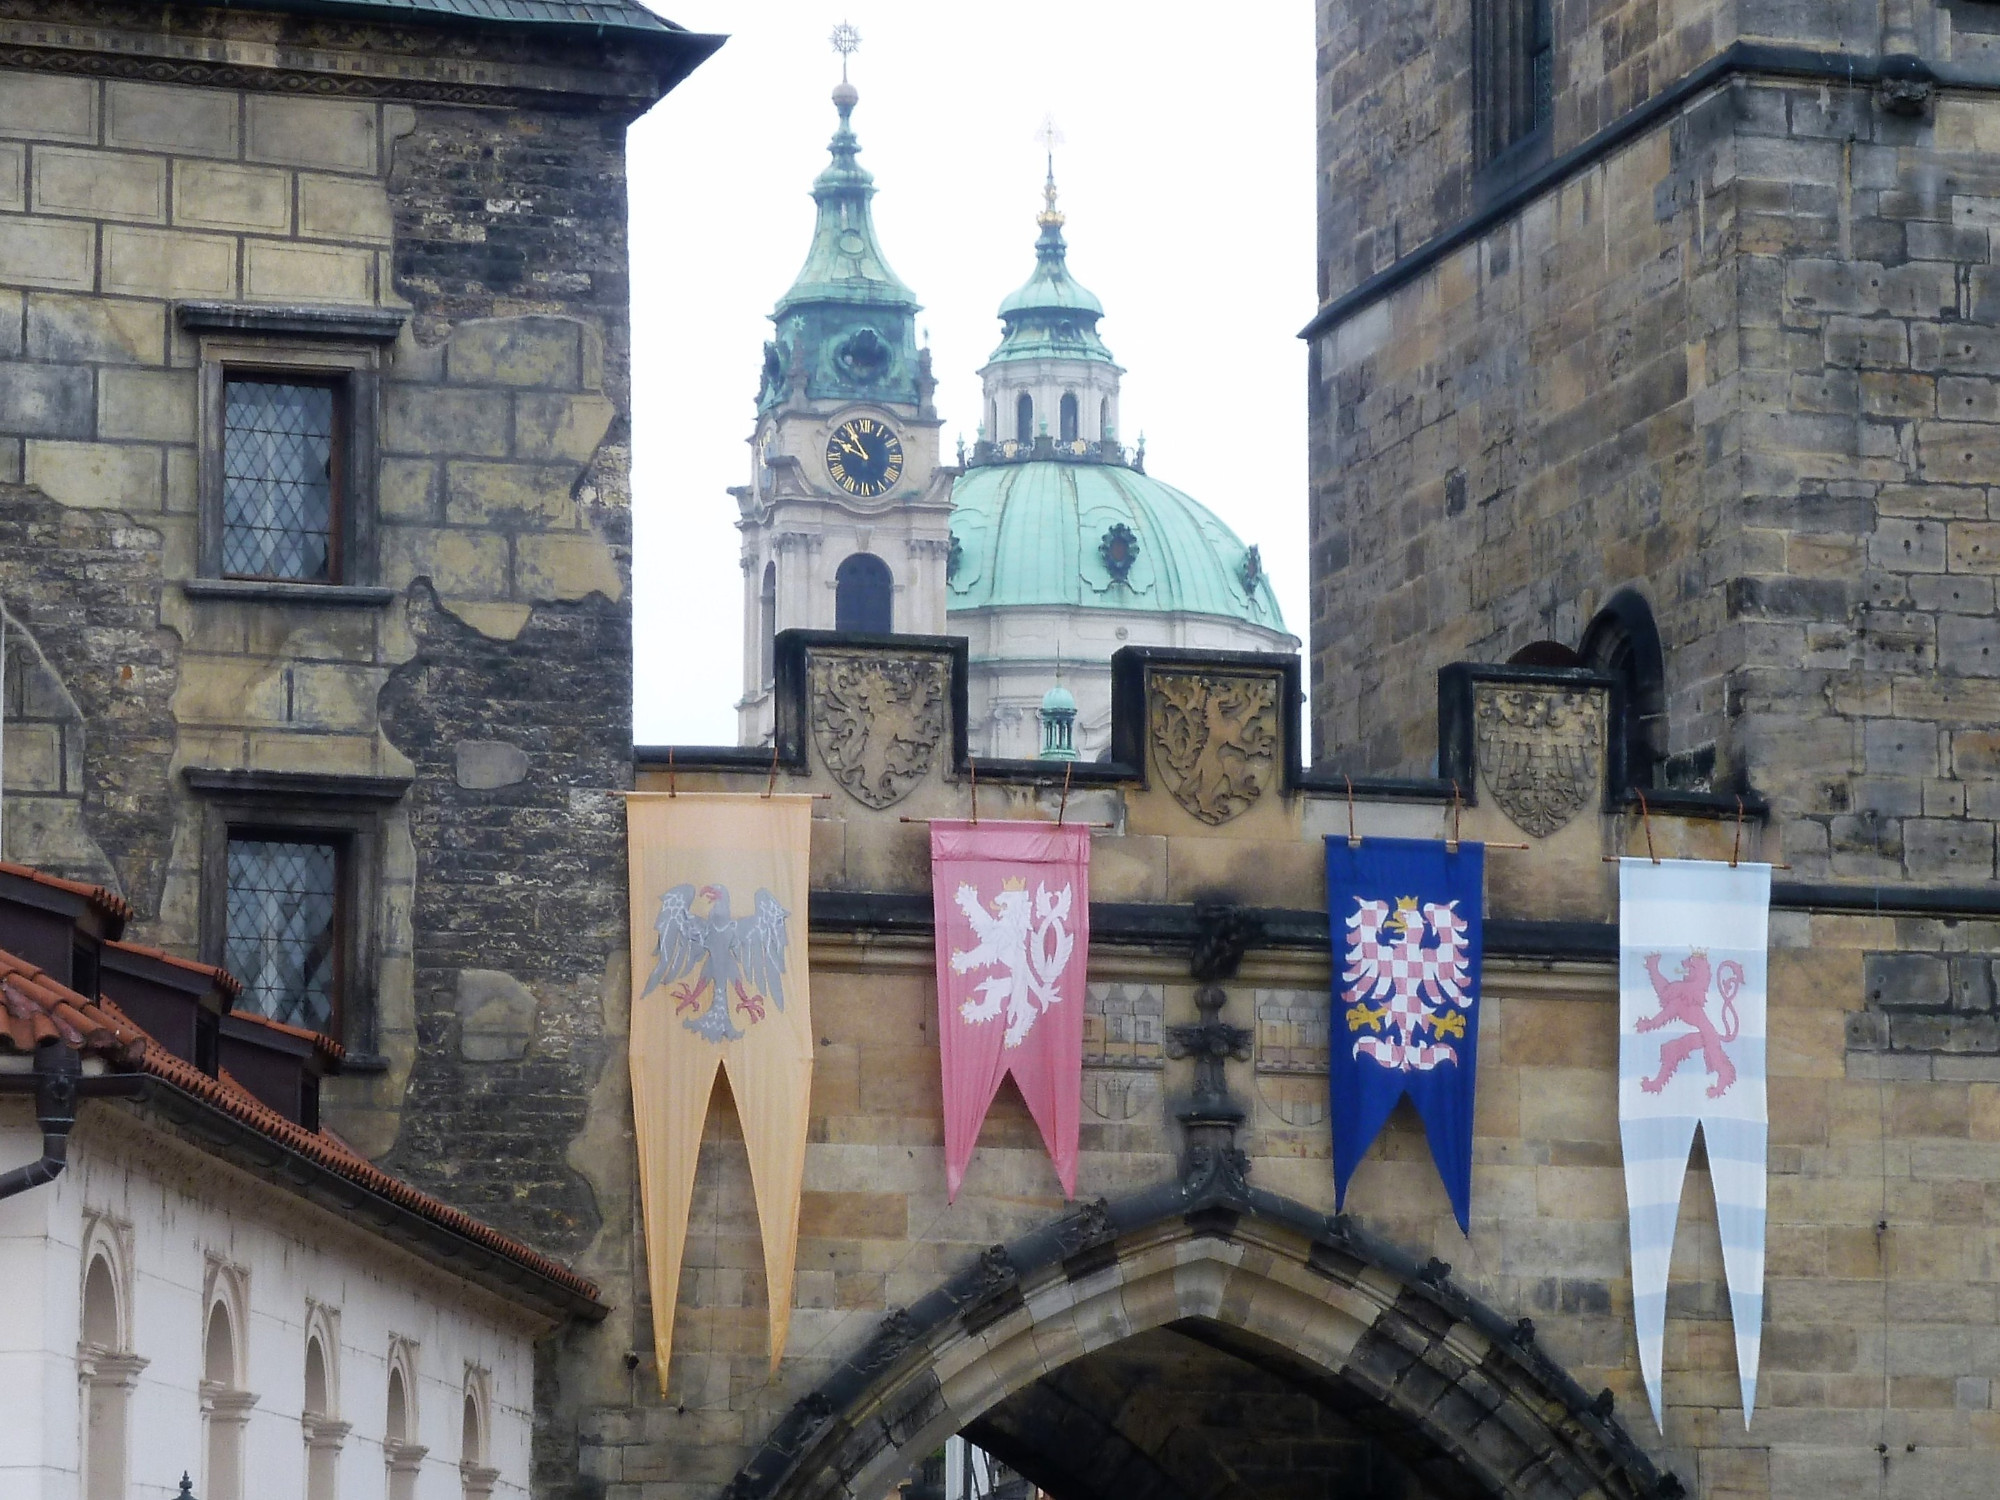 Flags Draped over entrance gate